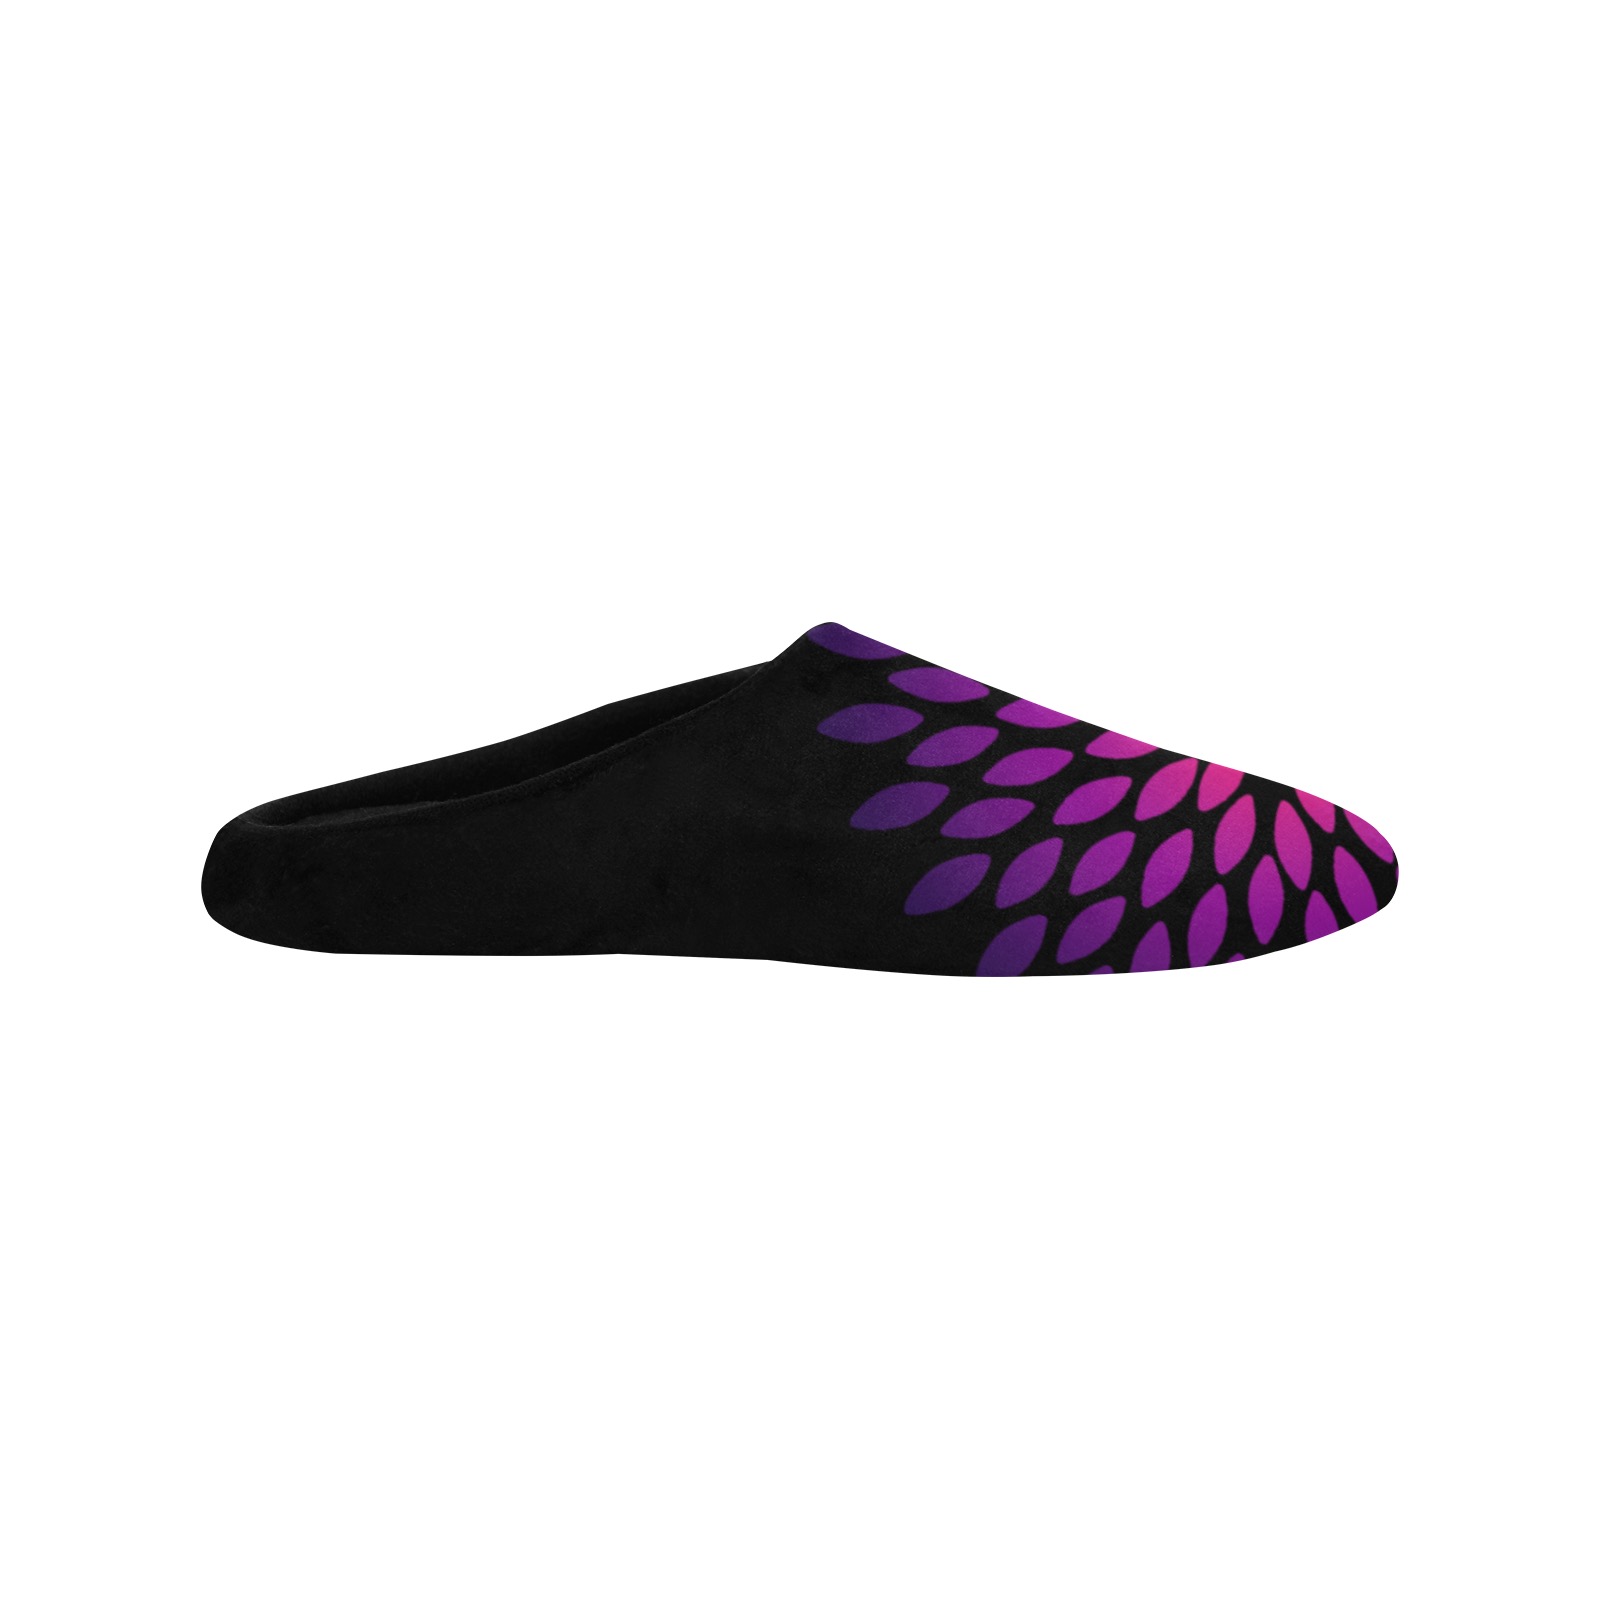 Ô Pink and Violet Zinnia on Black Women's Non-Slip Cotton Slippers (Model 0602)